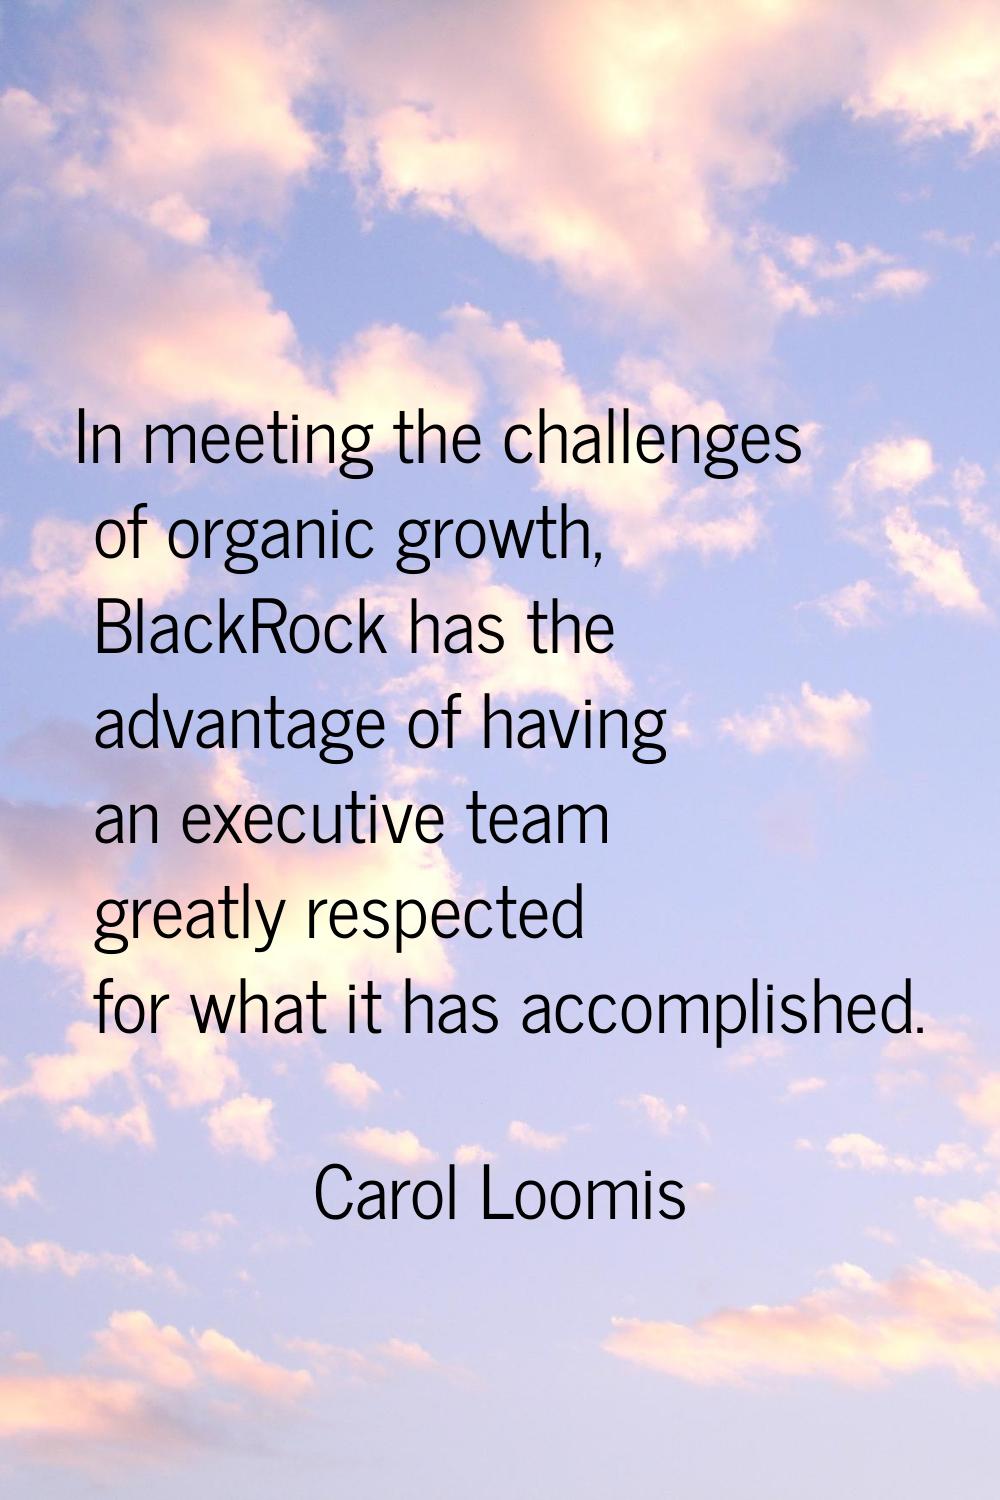 In meeting the challenges of organic growth, BlackRock has the advantage of having an executive tea